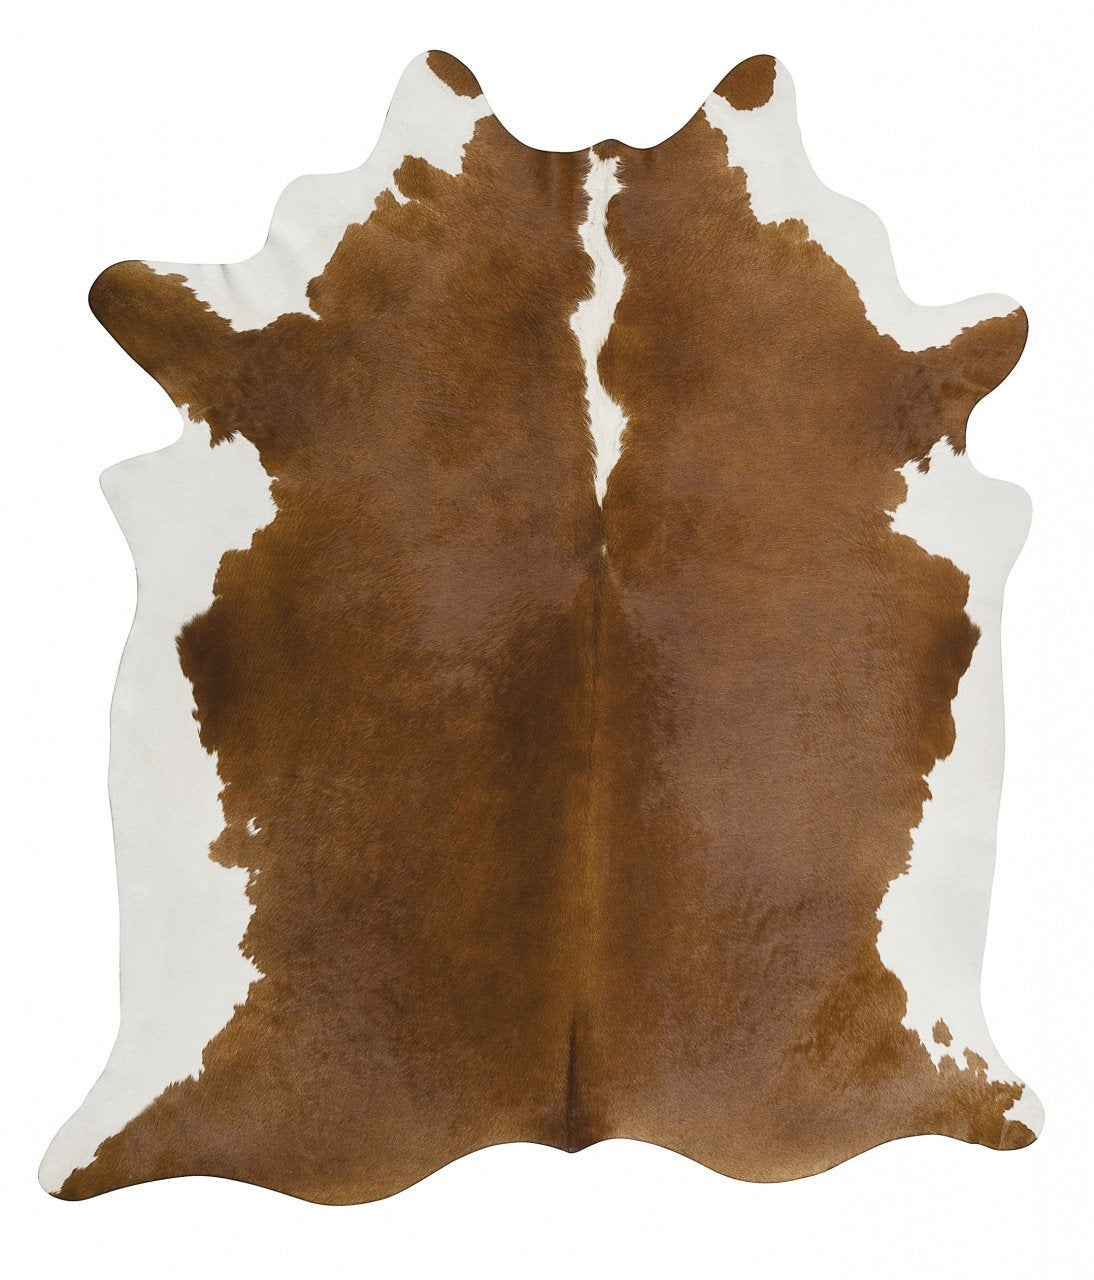 Exquisite Natural Cow Hide Rug Hereford - Newstart Furniture